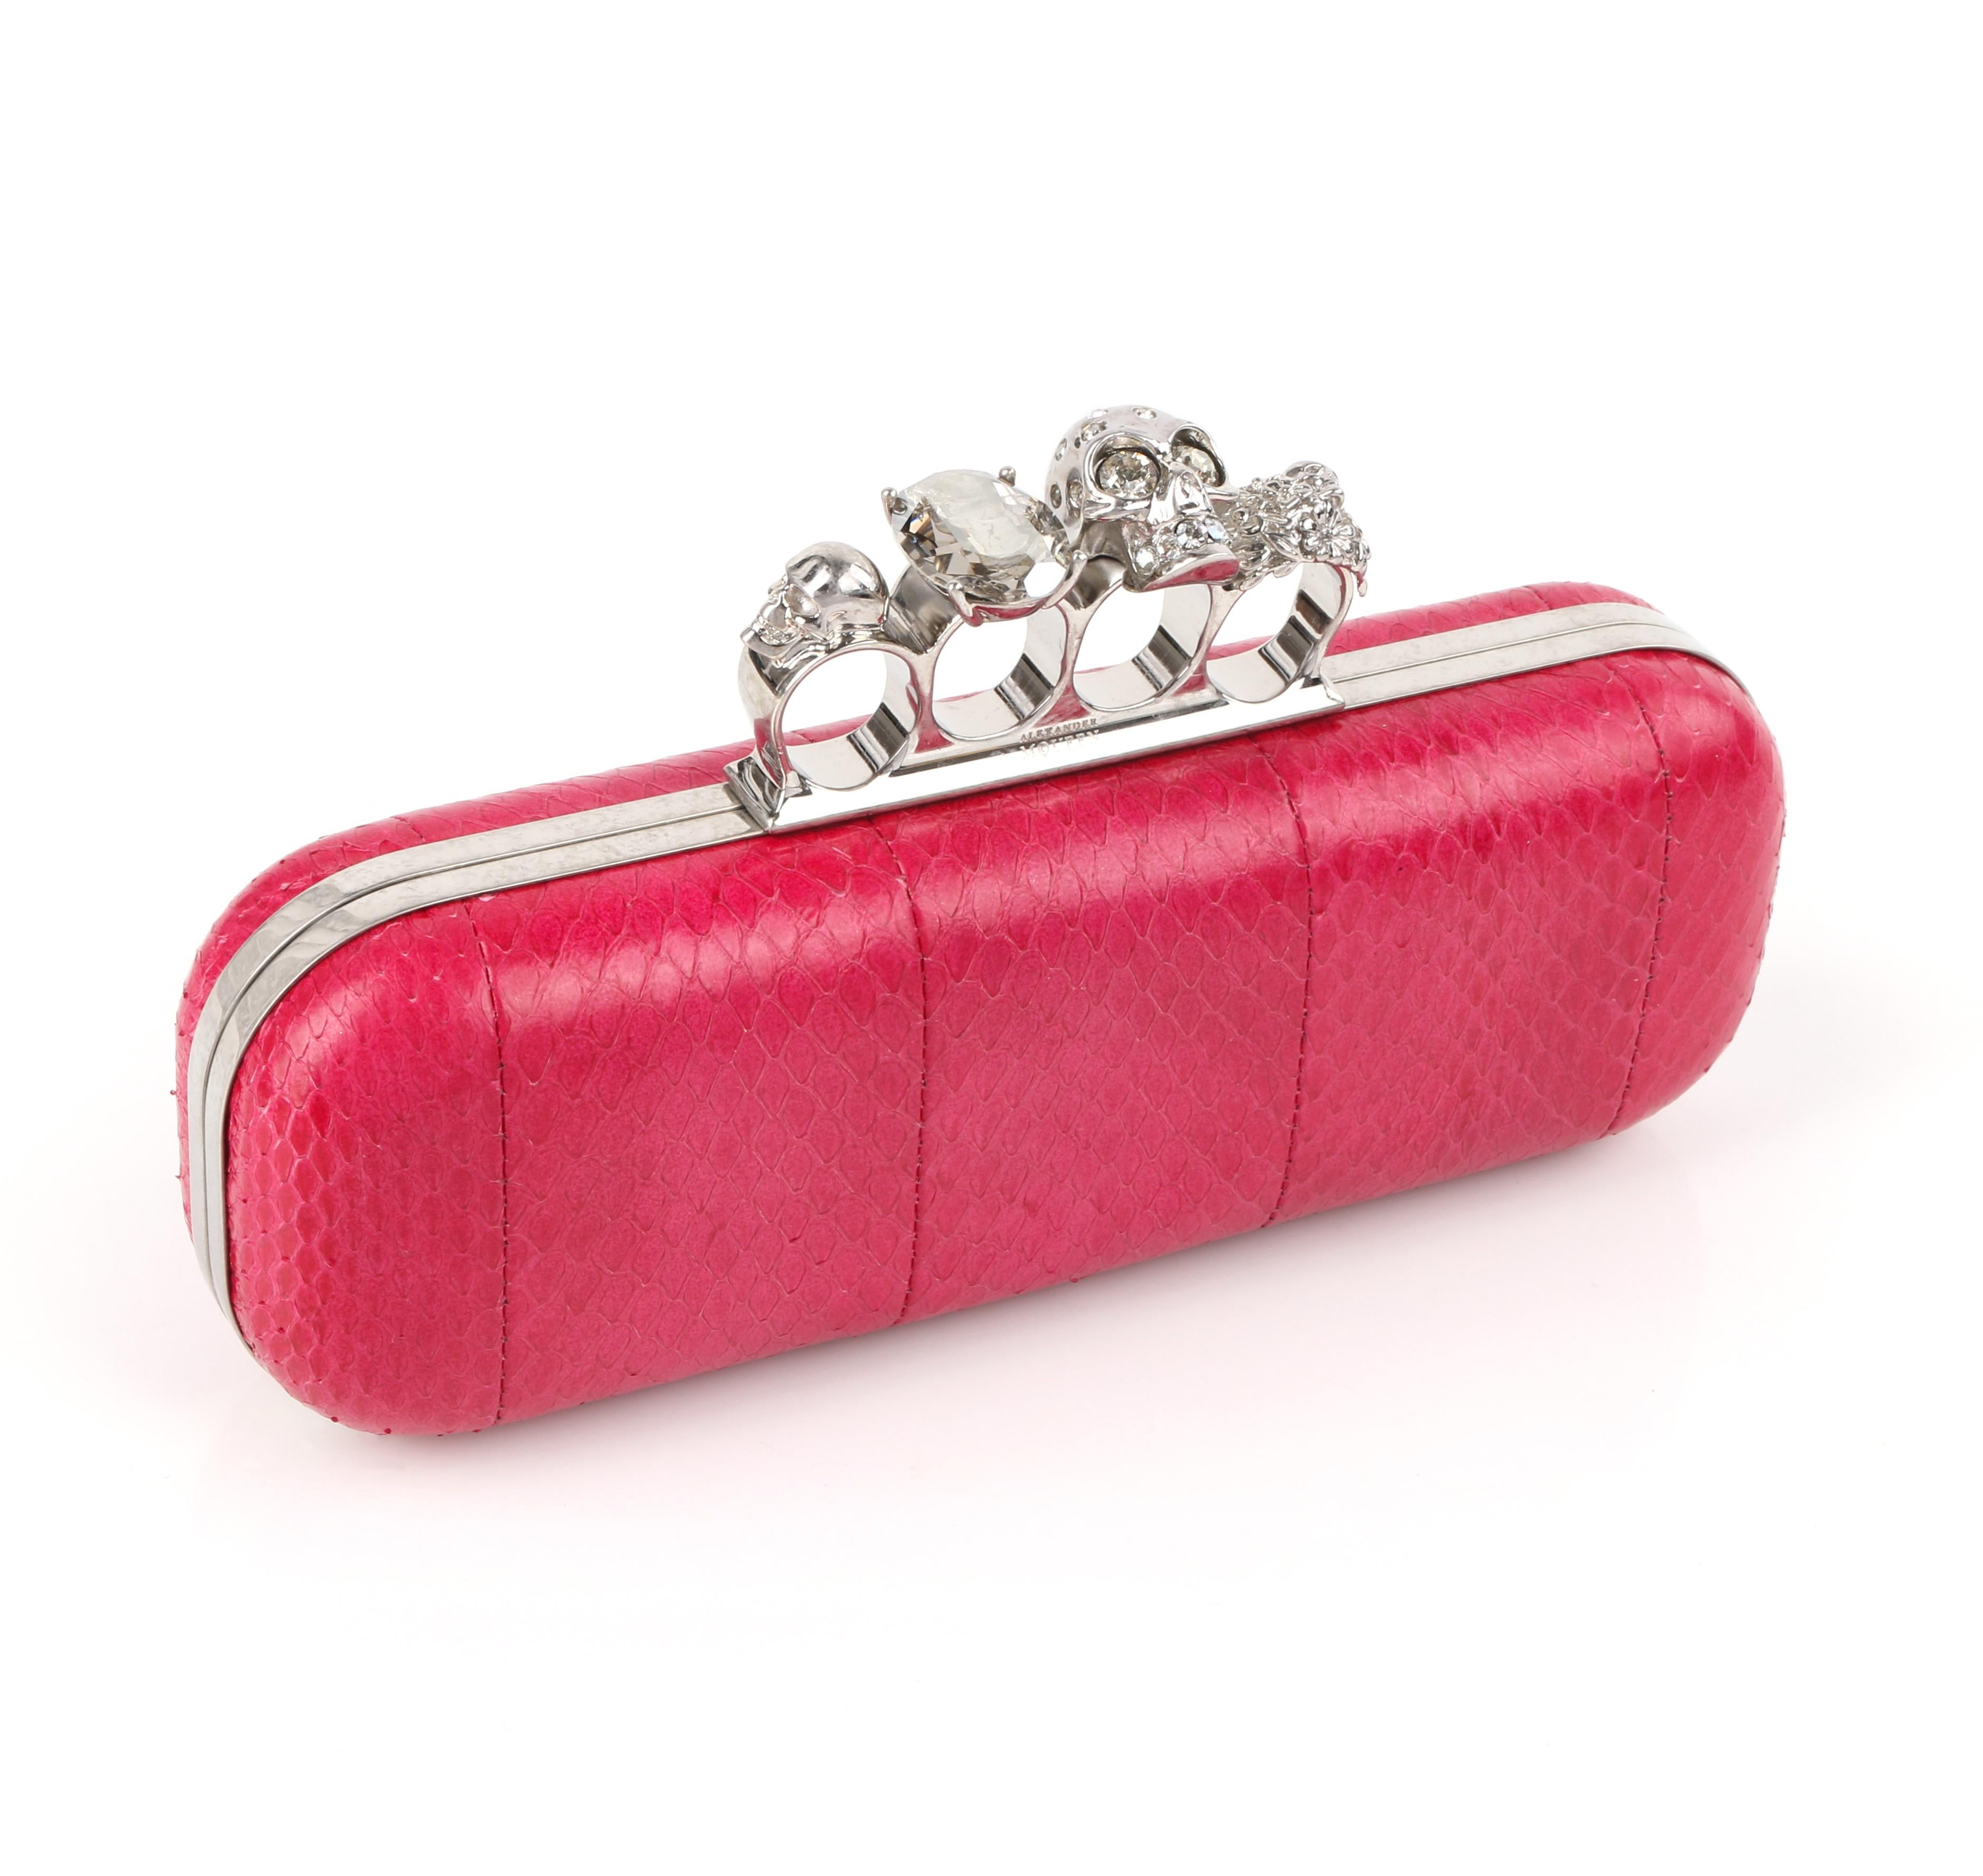 DESCRIPTION: ALEXANDER McQUEEN Fuchsia Pink Python Knuckle-Duster Box Clutch
 
Estimated Retail: $2,545
 
Brand / Manufacturer: Alexander McQueen
Style: Clutch
Color(s): Shades of pink
Lined: Yes
Unmarked Fabric Content (feel of): Python /